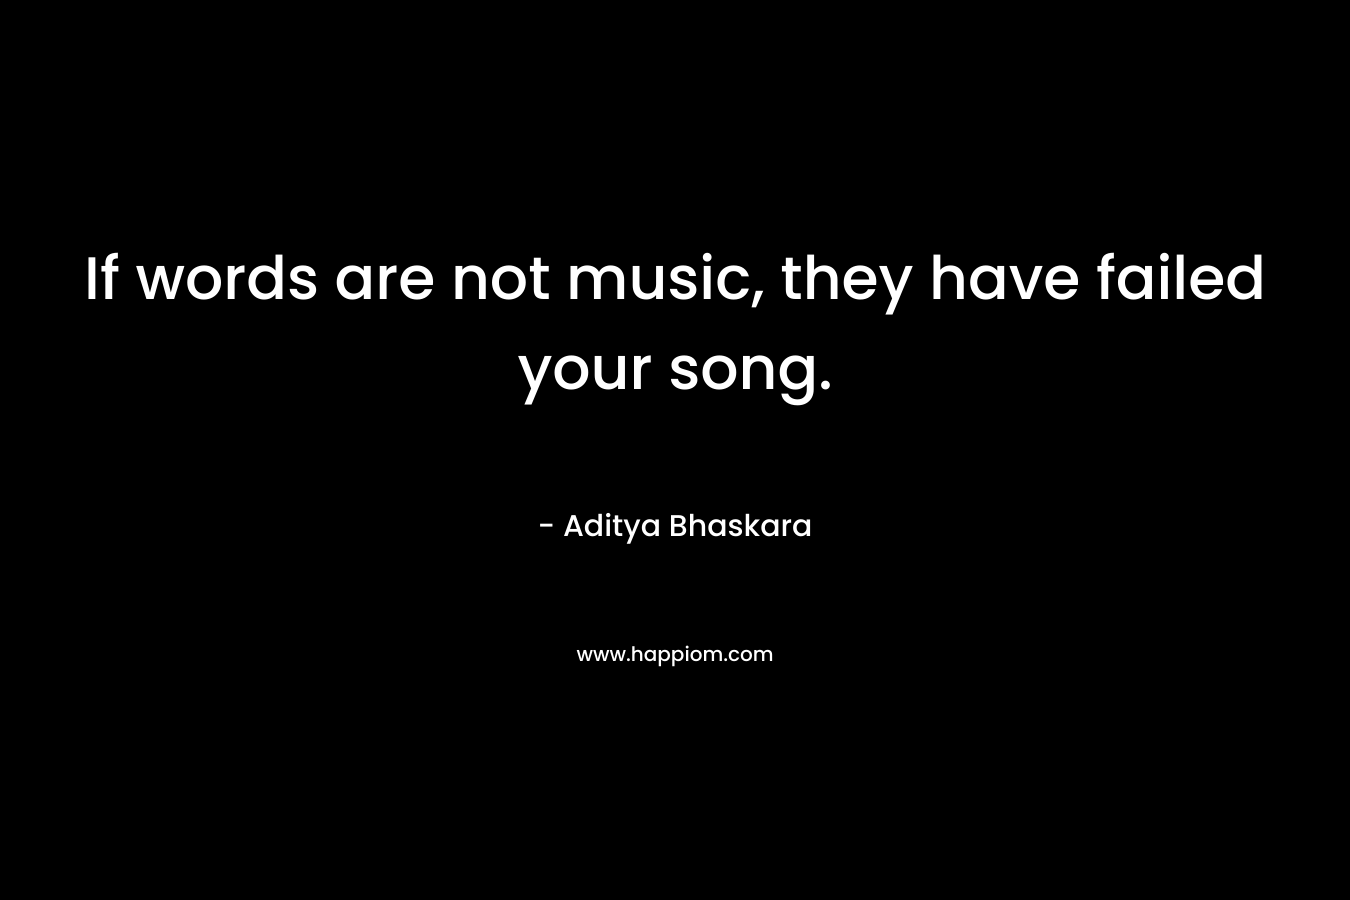 If words are not music, they have failed your song.